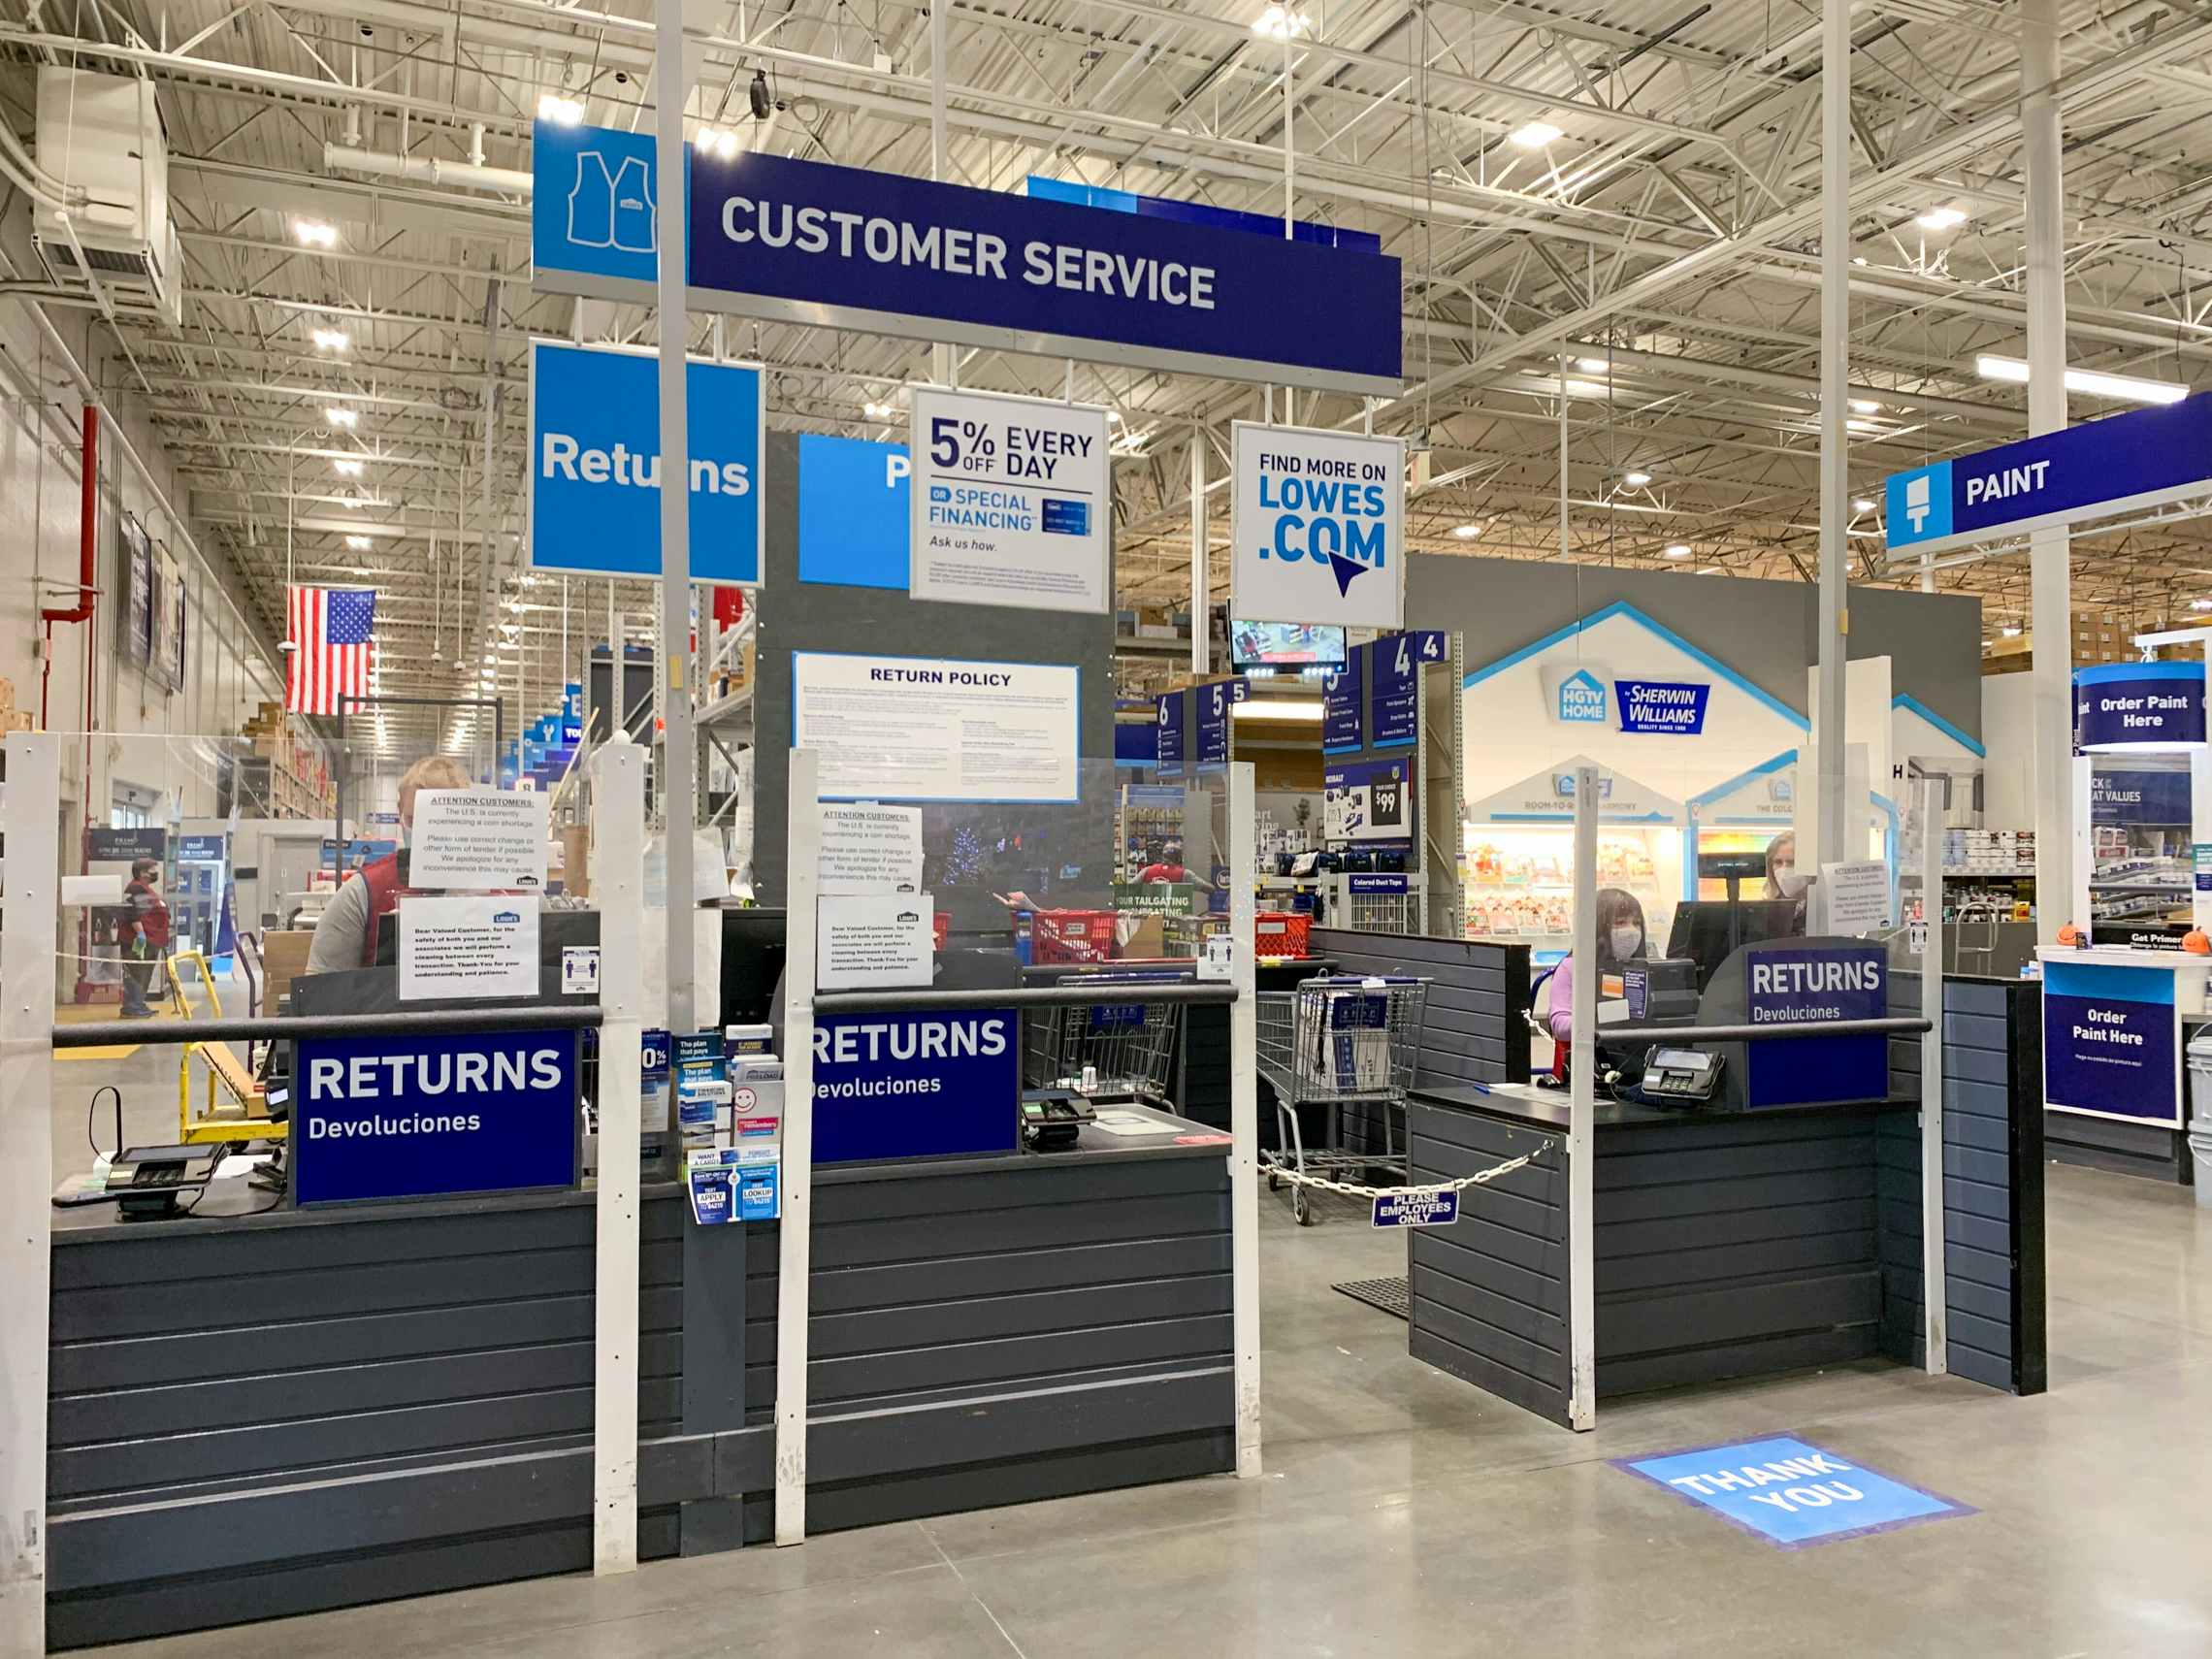 Return counter at Lowes